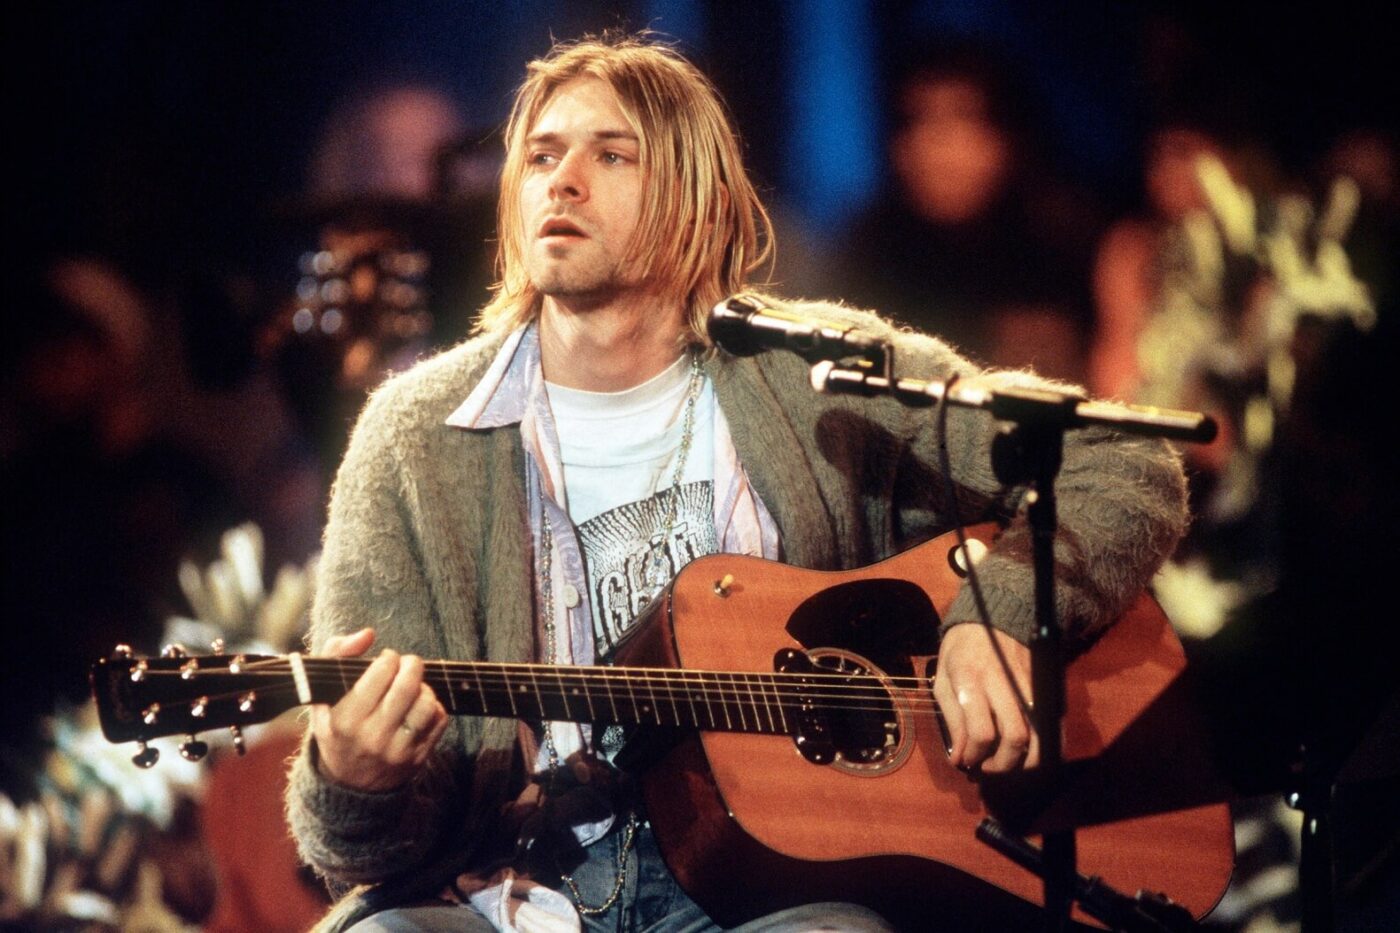 Kurt Cobain wearing his famous green cardigan sweater and playing the most expensive guitar sold at auction, as seen at the MTV Unplugged performance